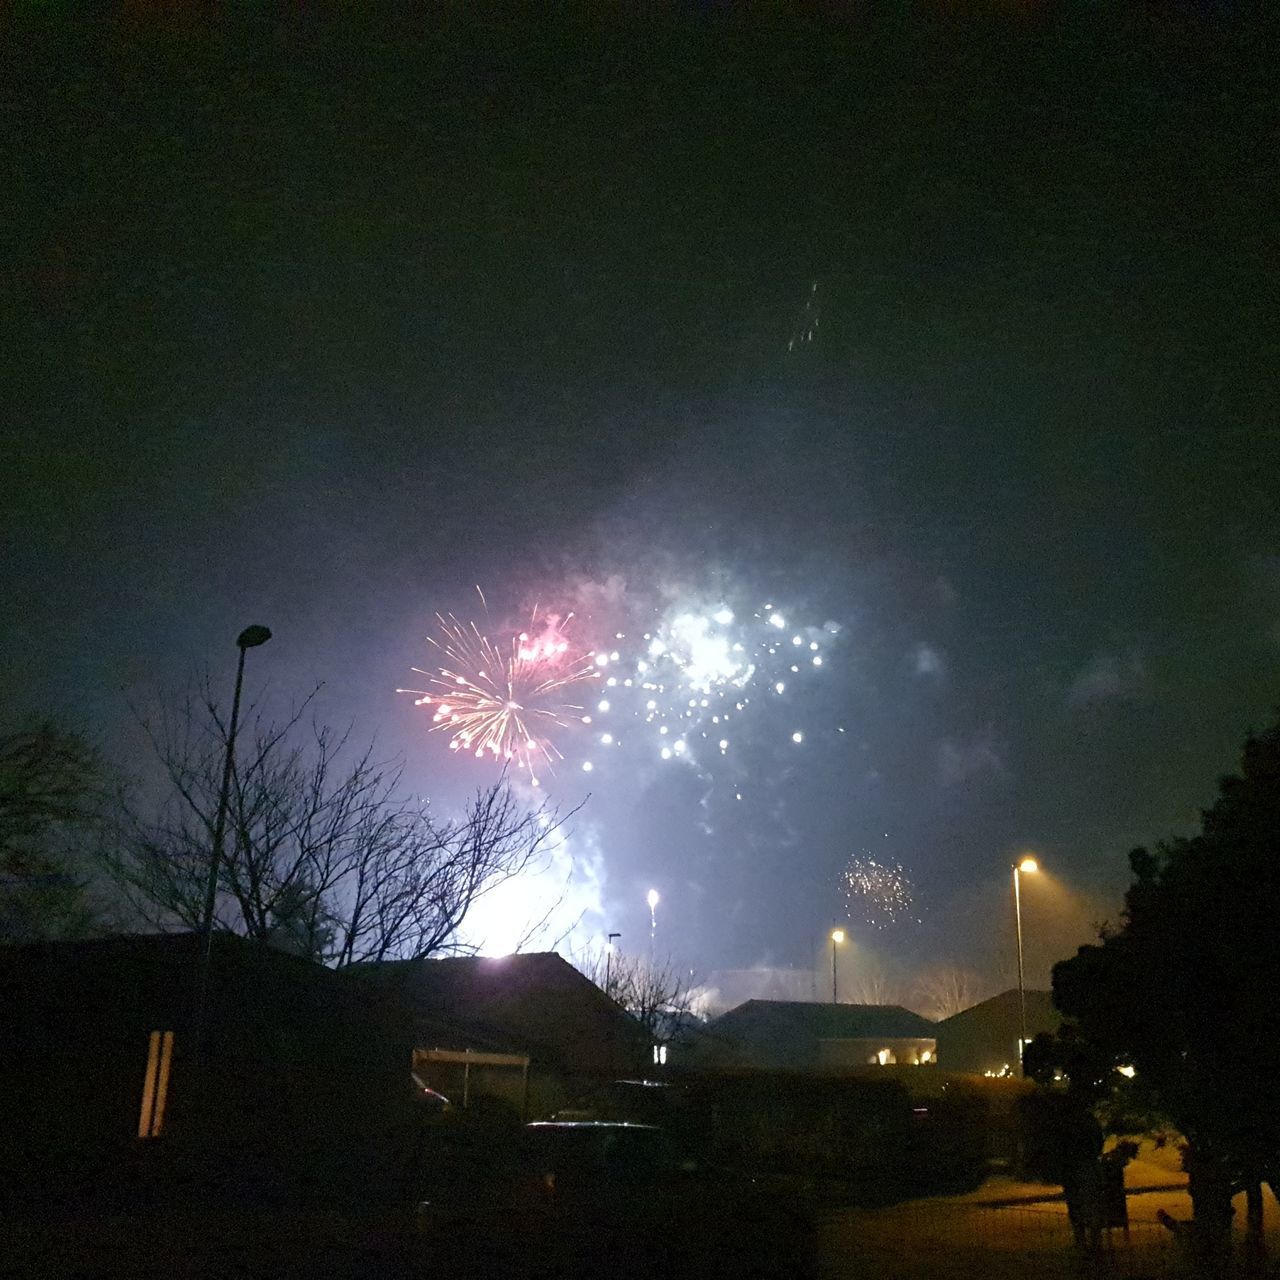 LOW ANGLE VIEW OF FIREWORK DISPLAY OVER BUILDING